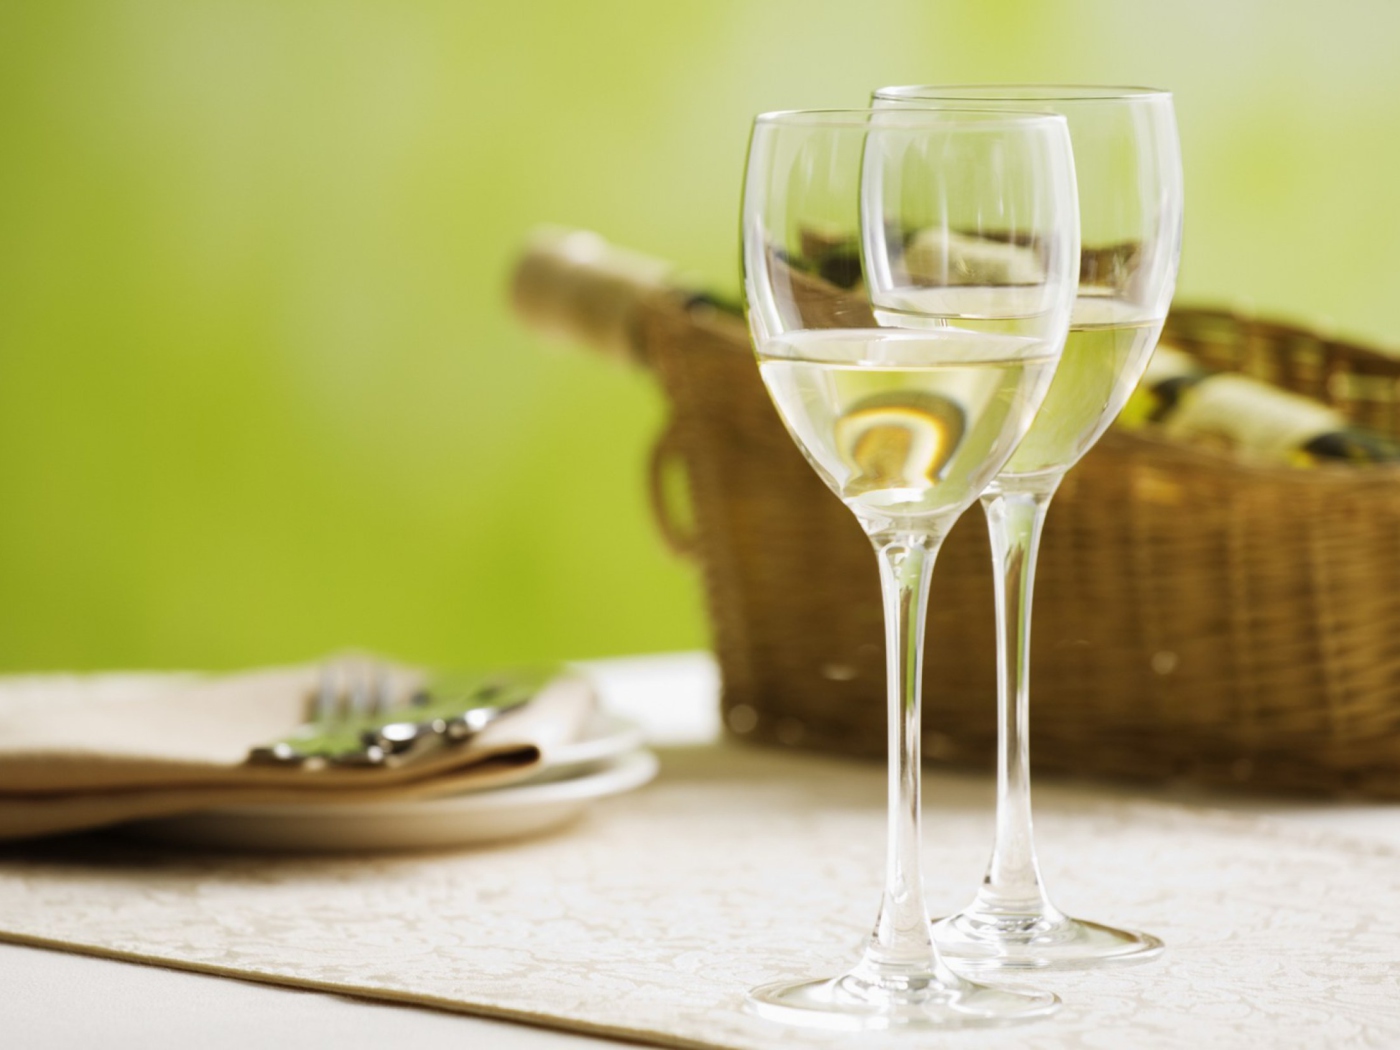 Two Glaeese Of White Wine On Table wallpaper 1400x1050